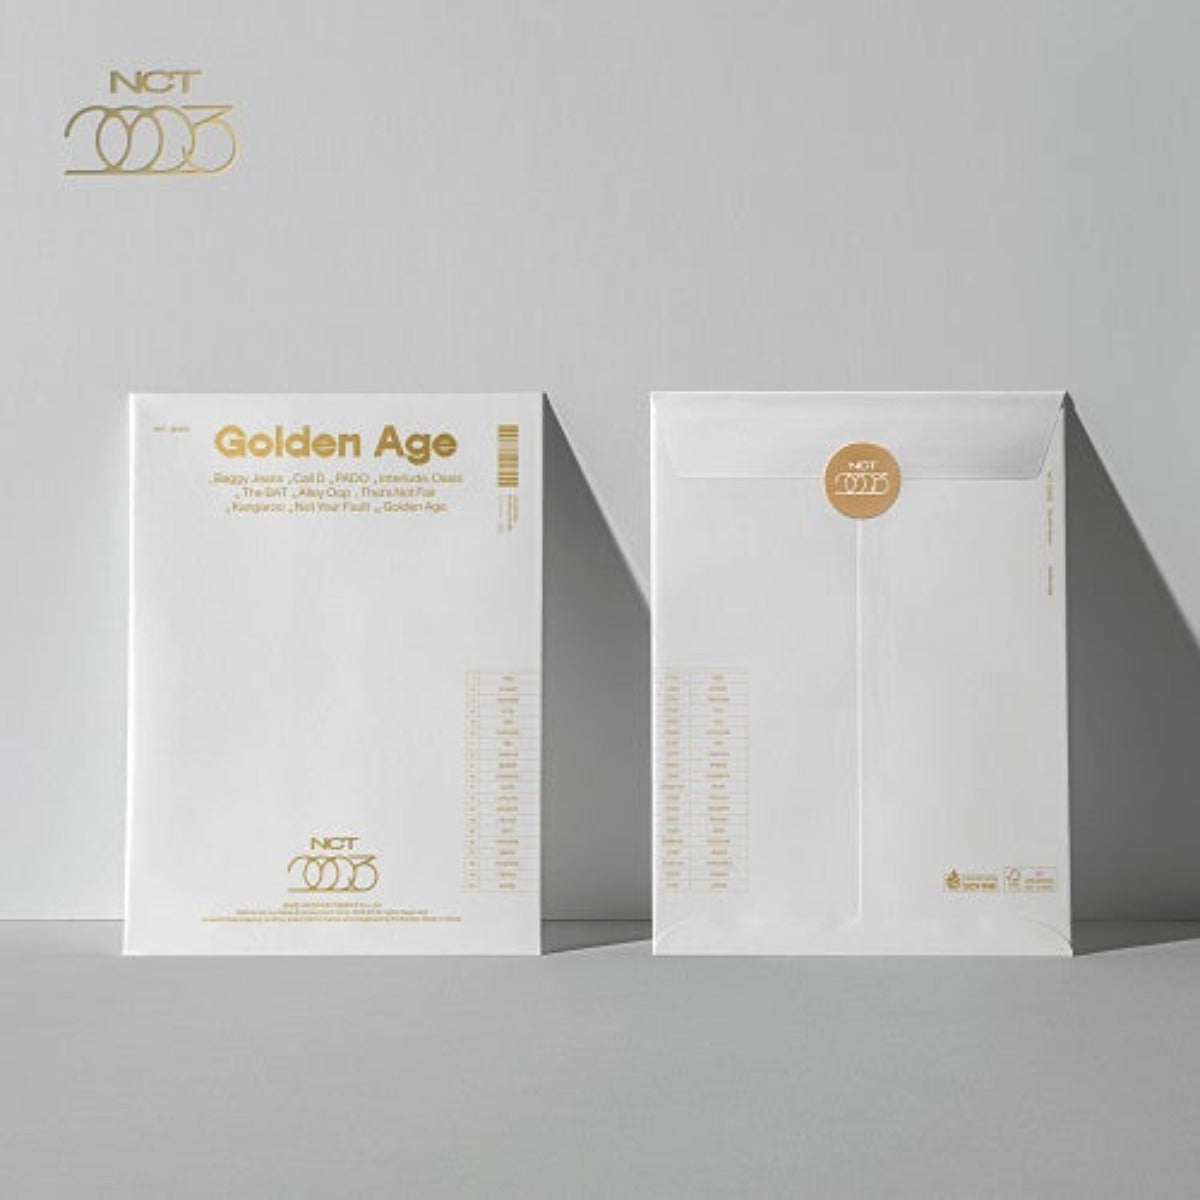 NCT Vol. 4 - Golden Age (Collecting Version)